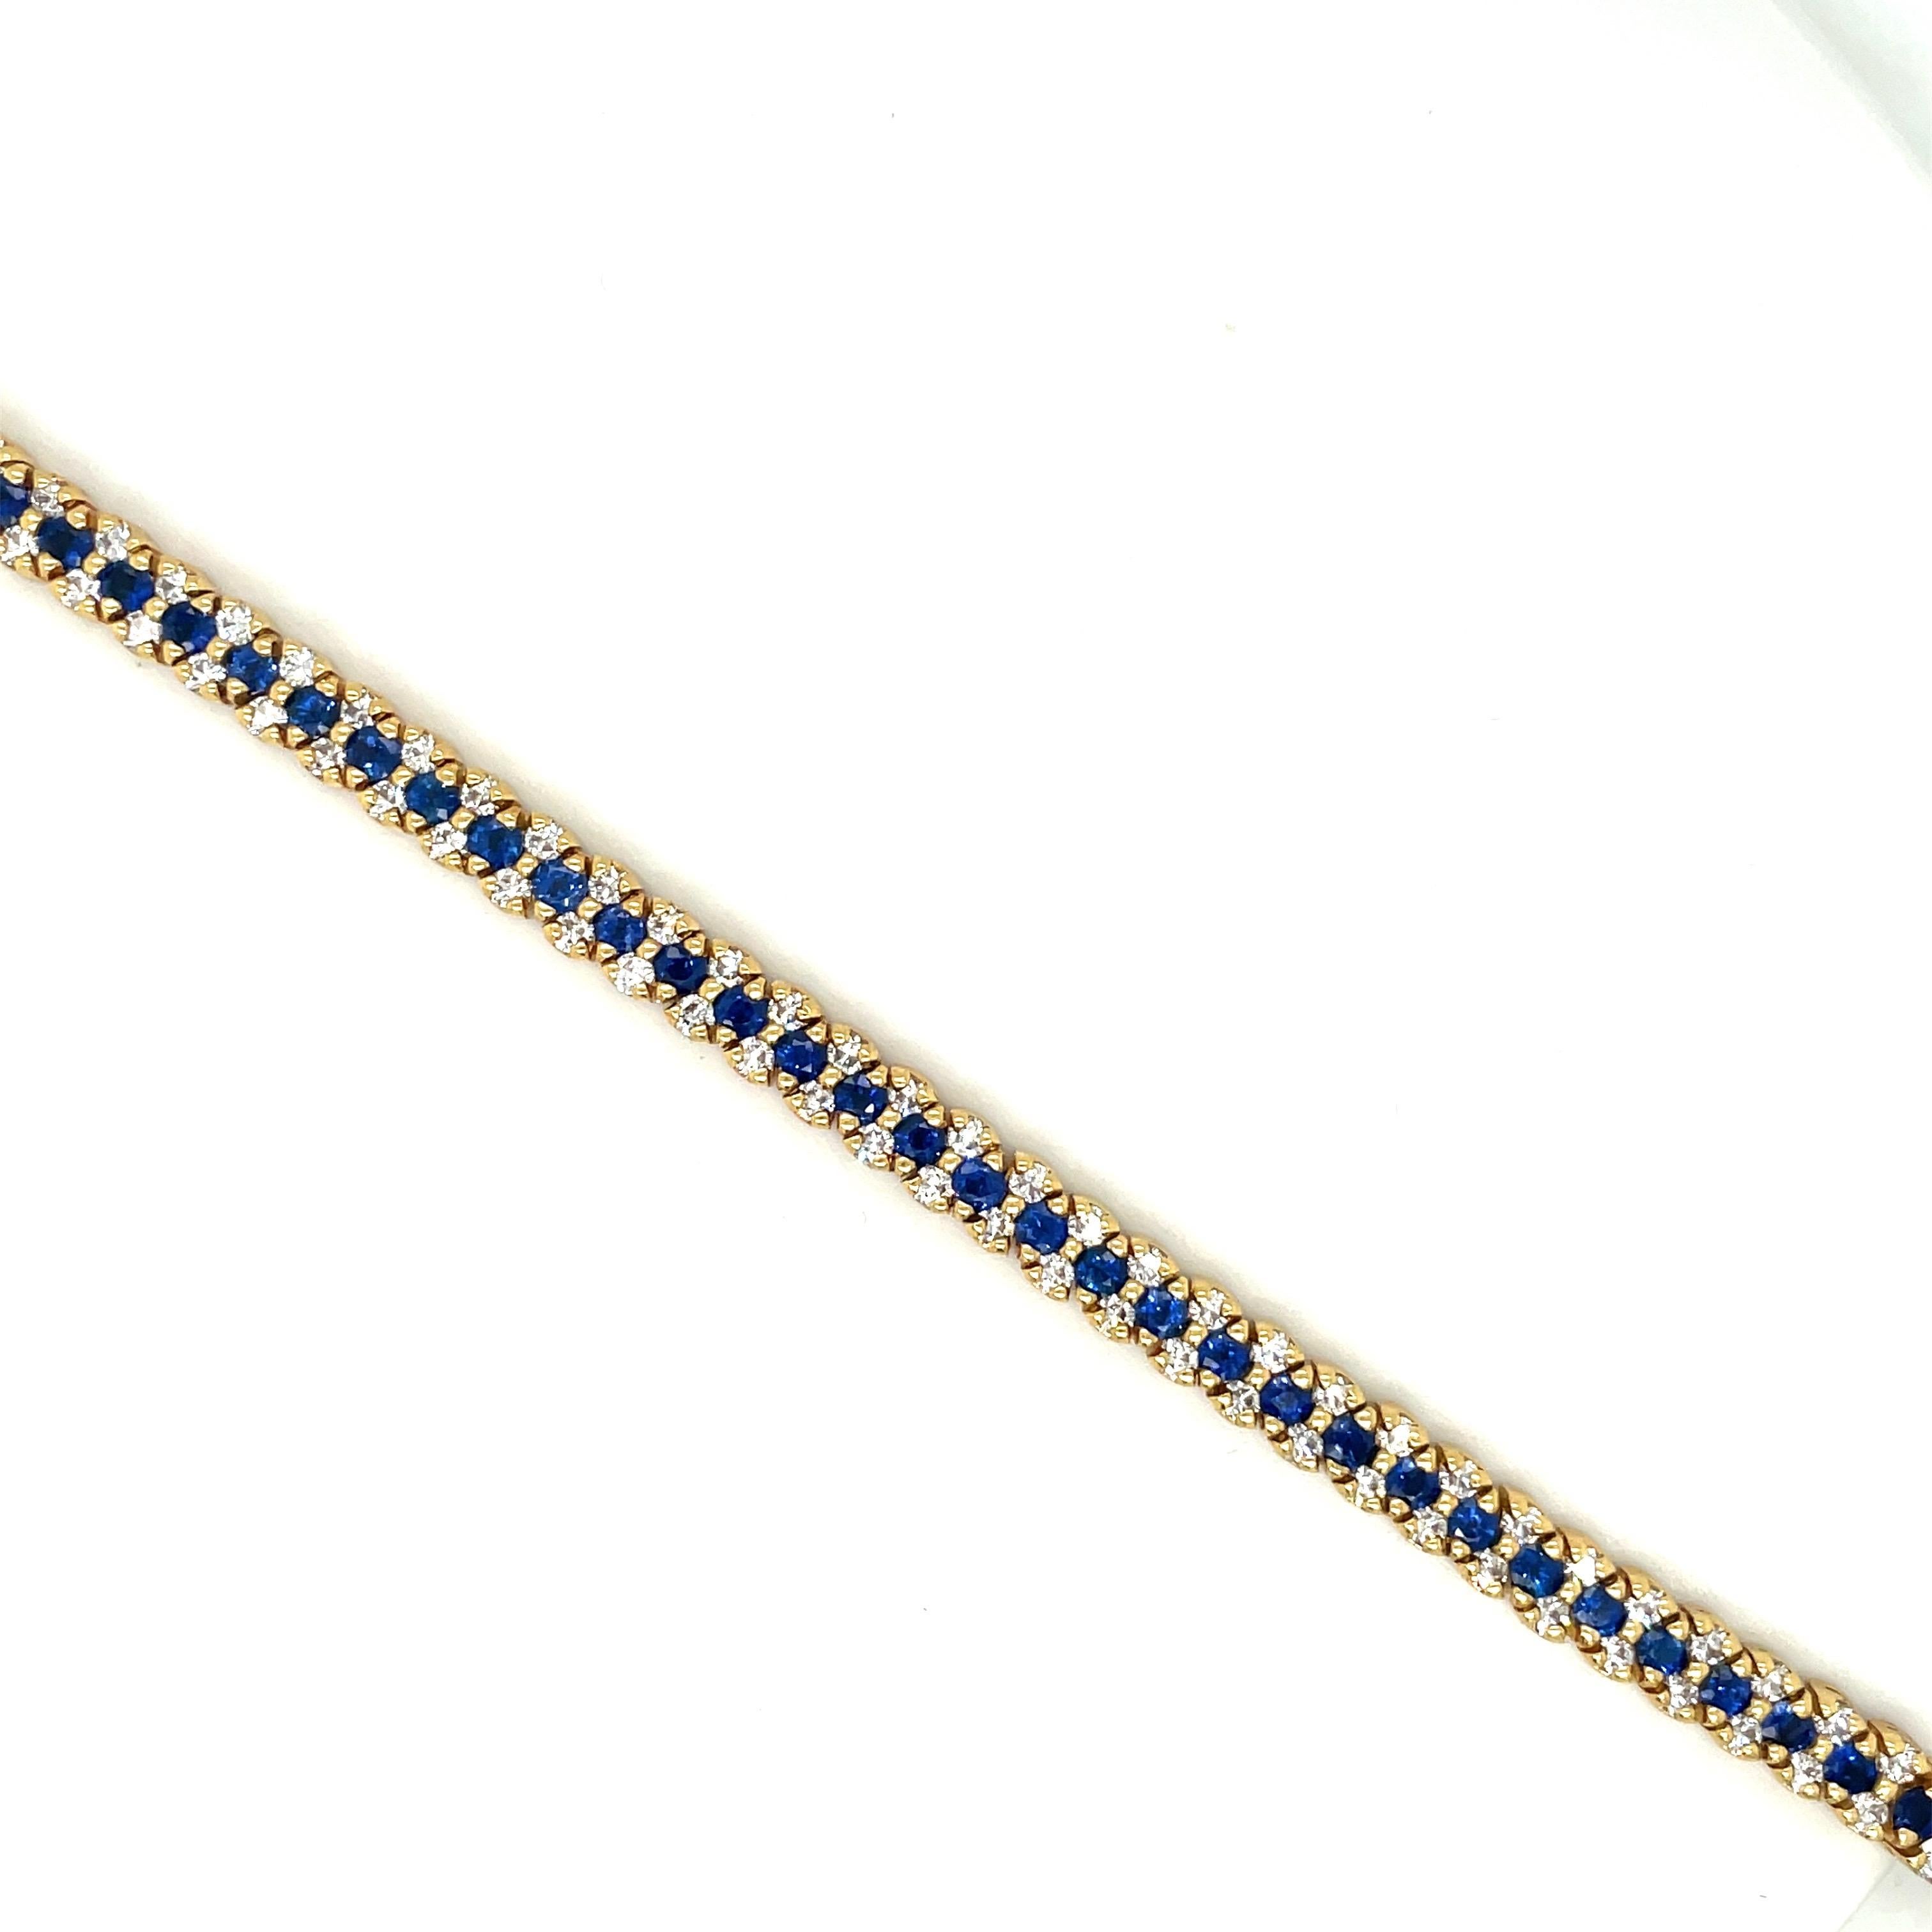 18 karat yellow gold tennis bracelet. This bracelet is designed with a center row of round brilliant cut blue sapphires and two rows of round brilliant cut diamonds. This is a timeless and classic bracelet. The bracelet measures 7